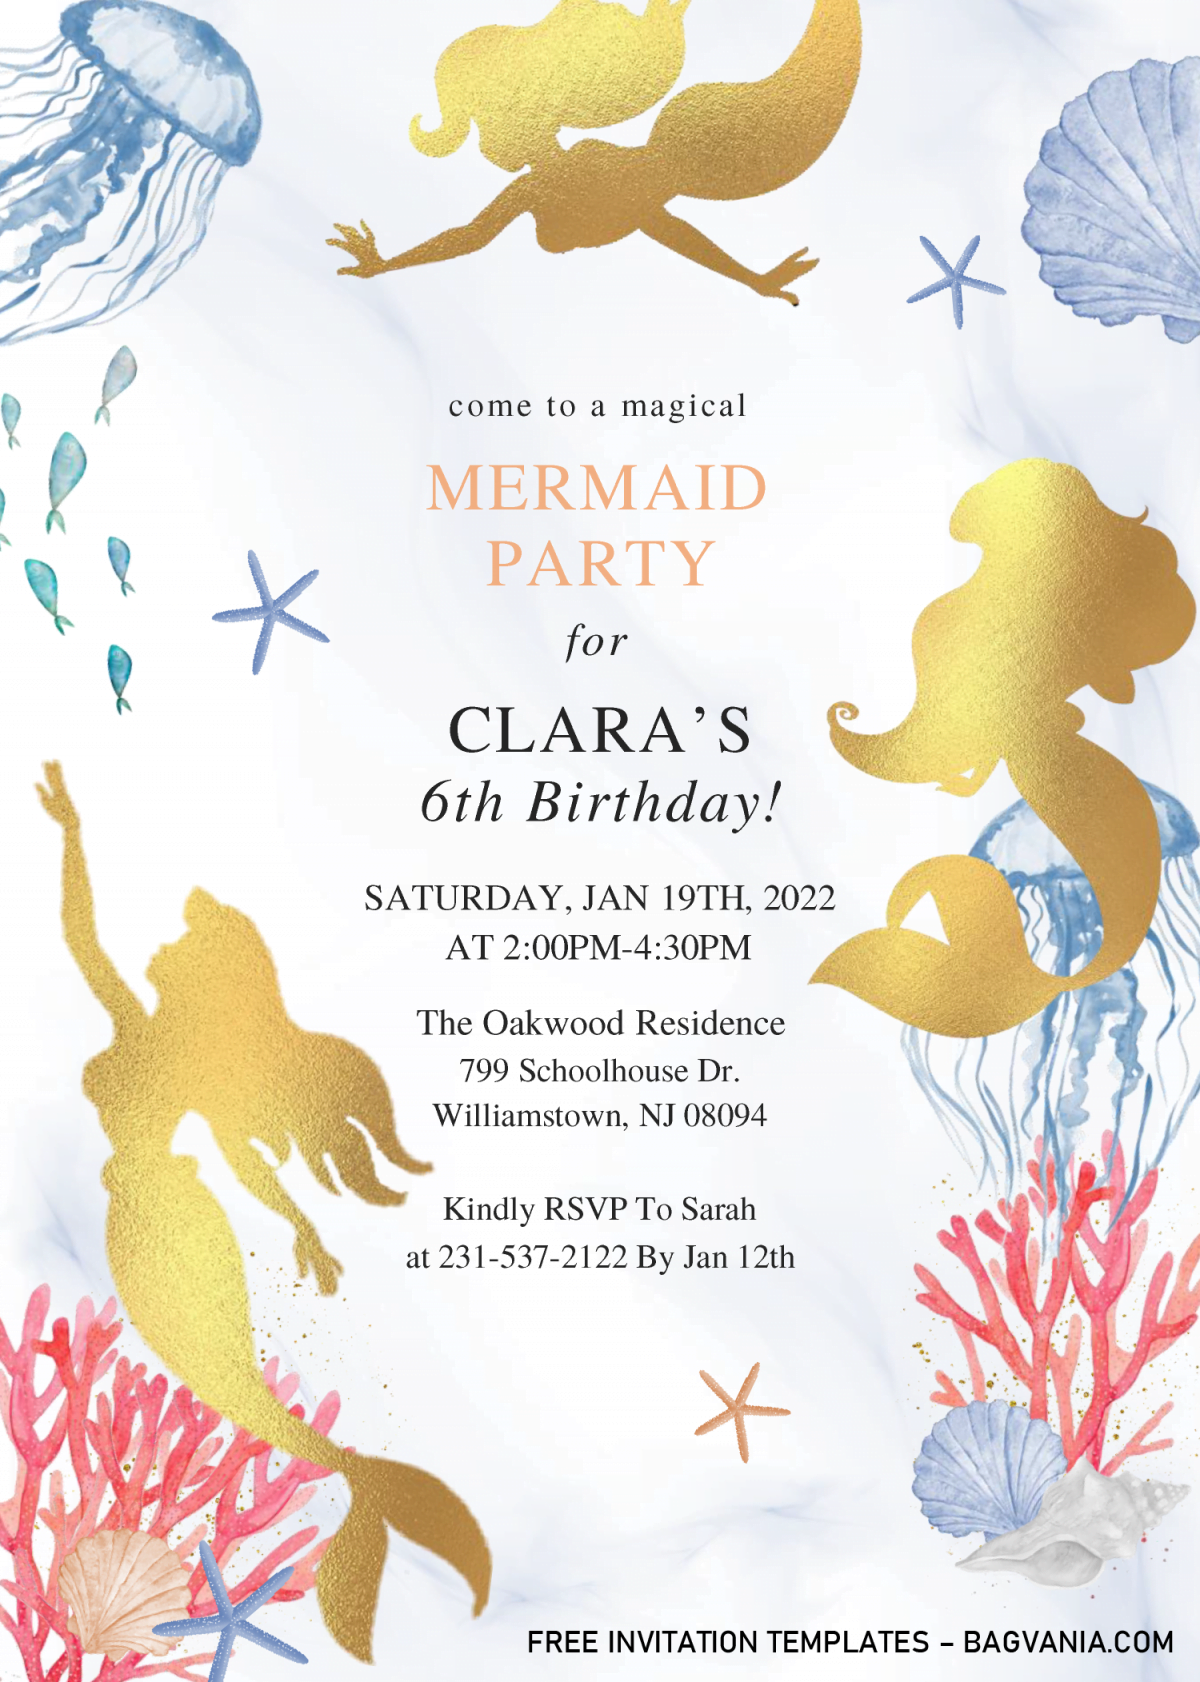 Mermaid Party Invitation Templates - Editable With Microsoft Word and has white and blue marble background